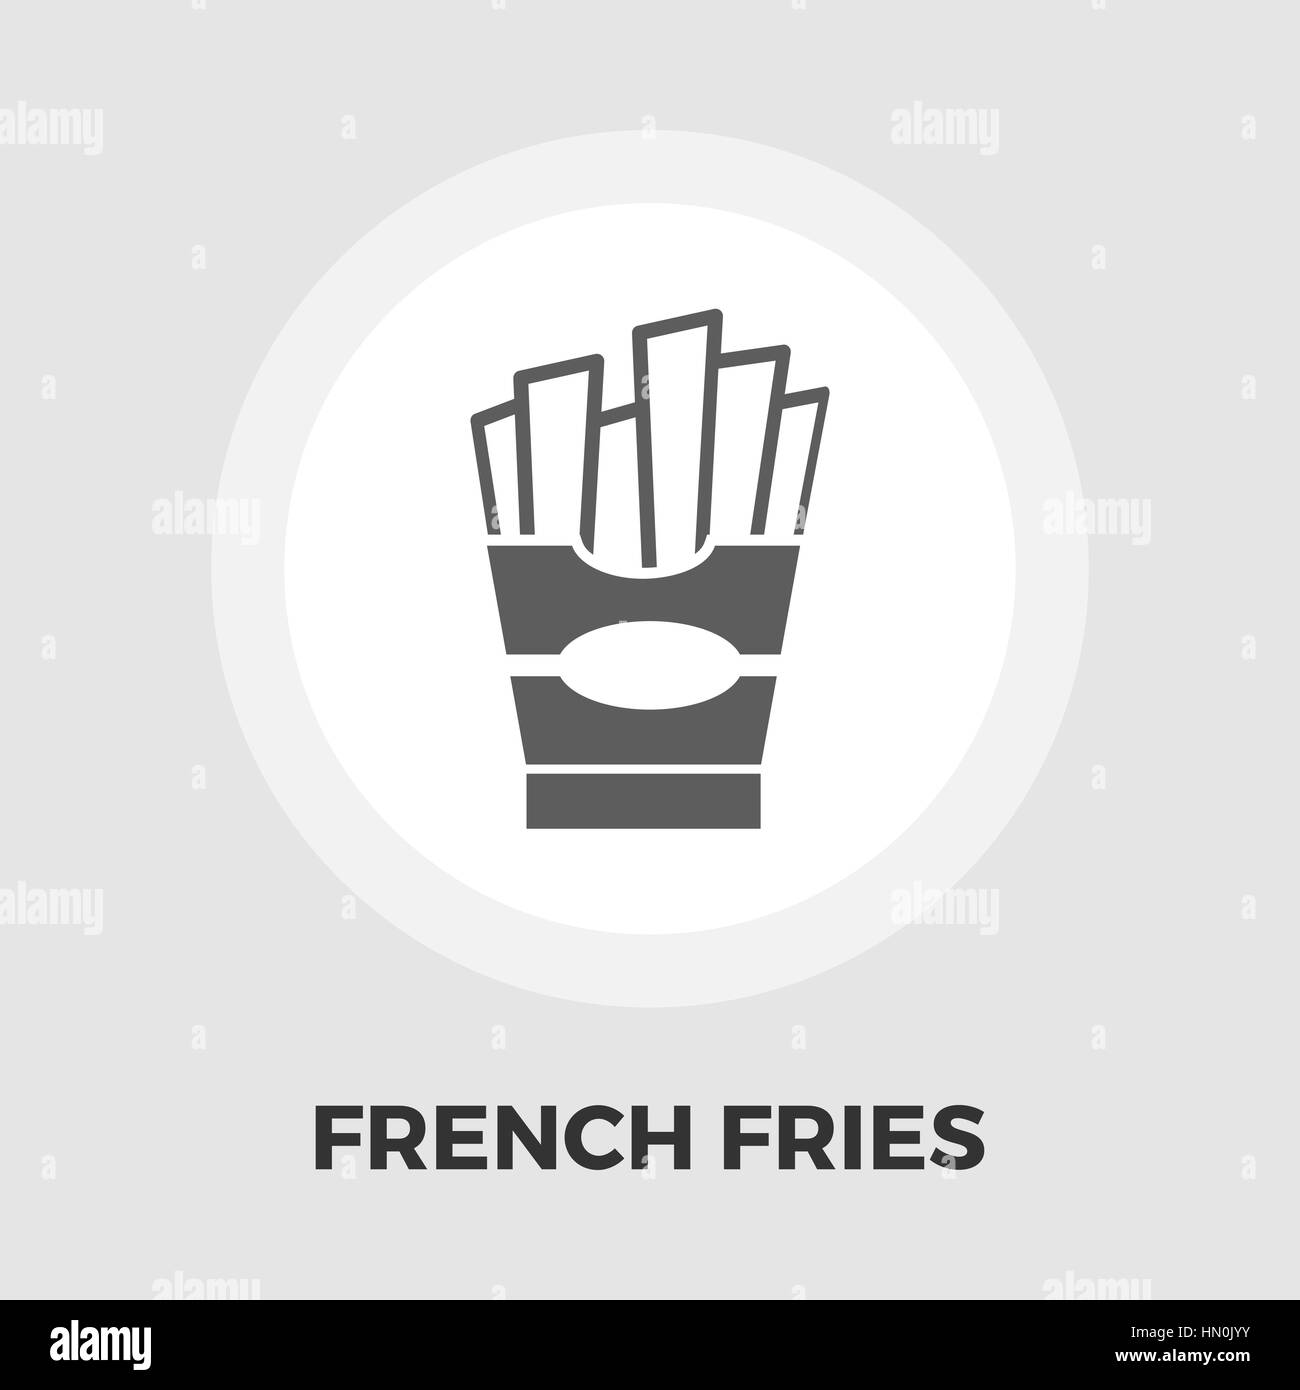 French fries icon vector. Flat icon isolated on the white background. Editable EPS file. Vector illustration. Stock Vector